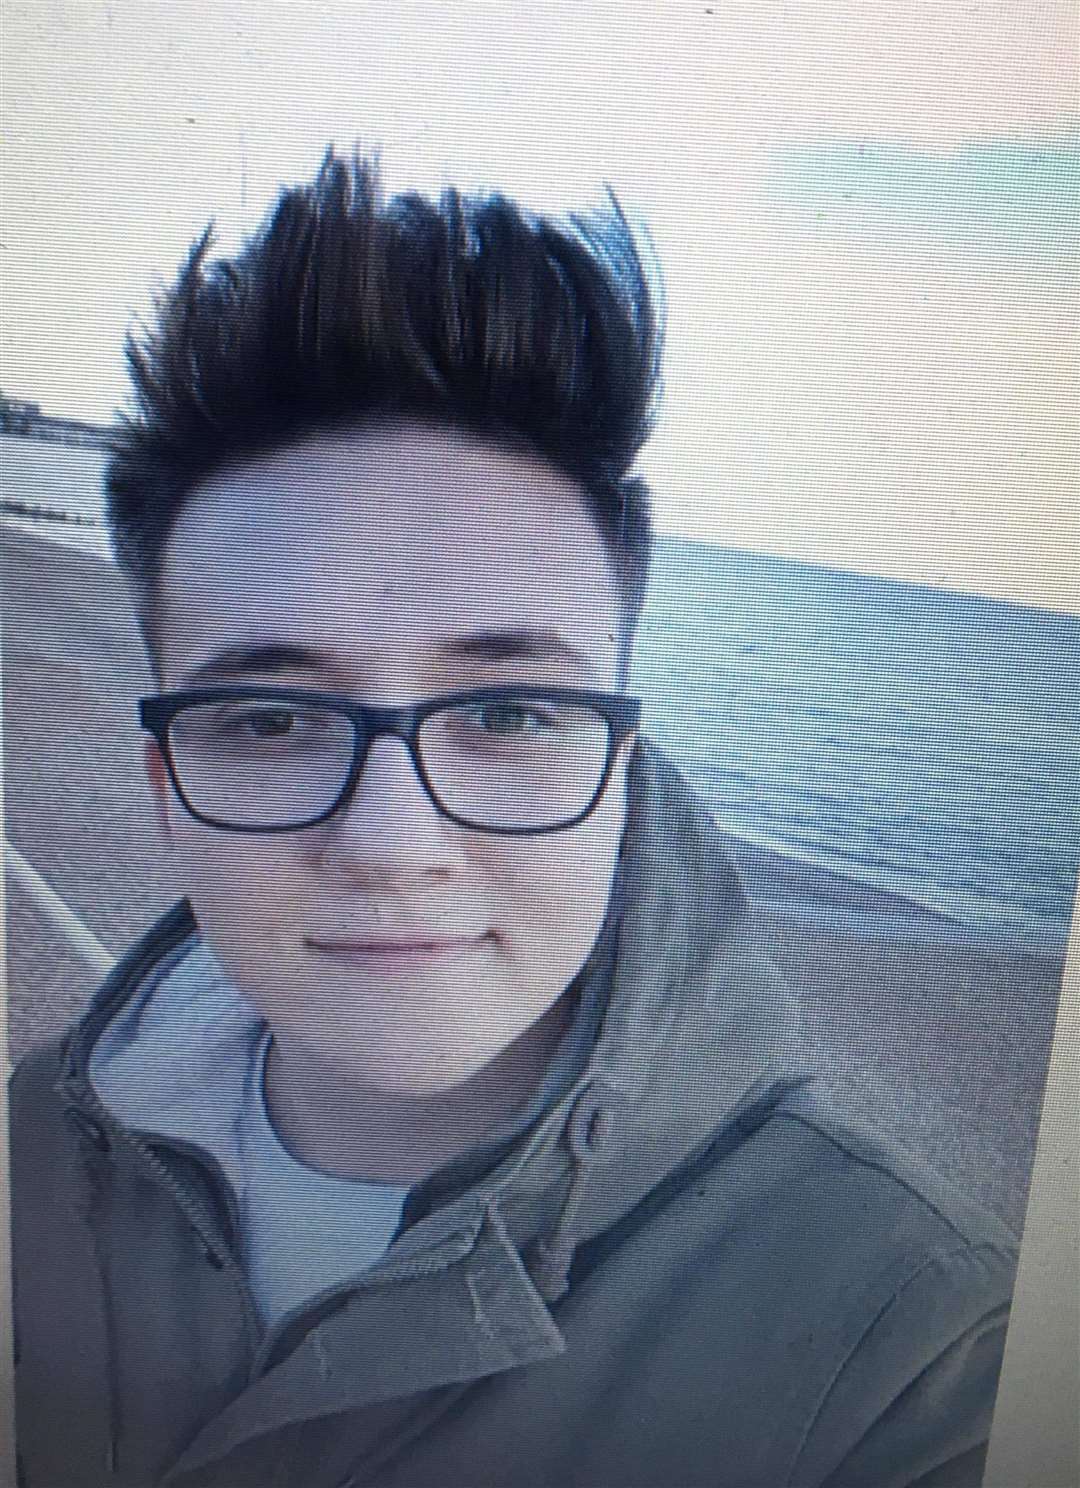 Madalin-Constantin Lungoci, 22, from Hastings died at the scene